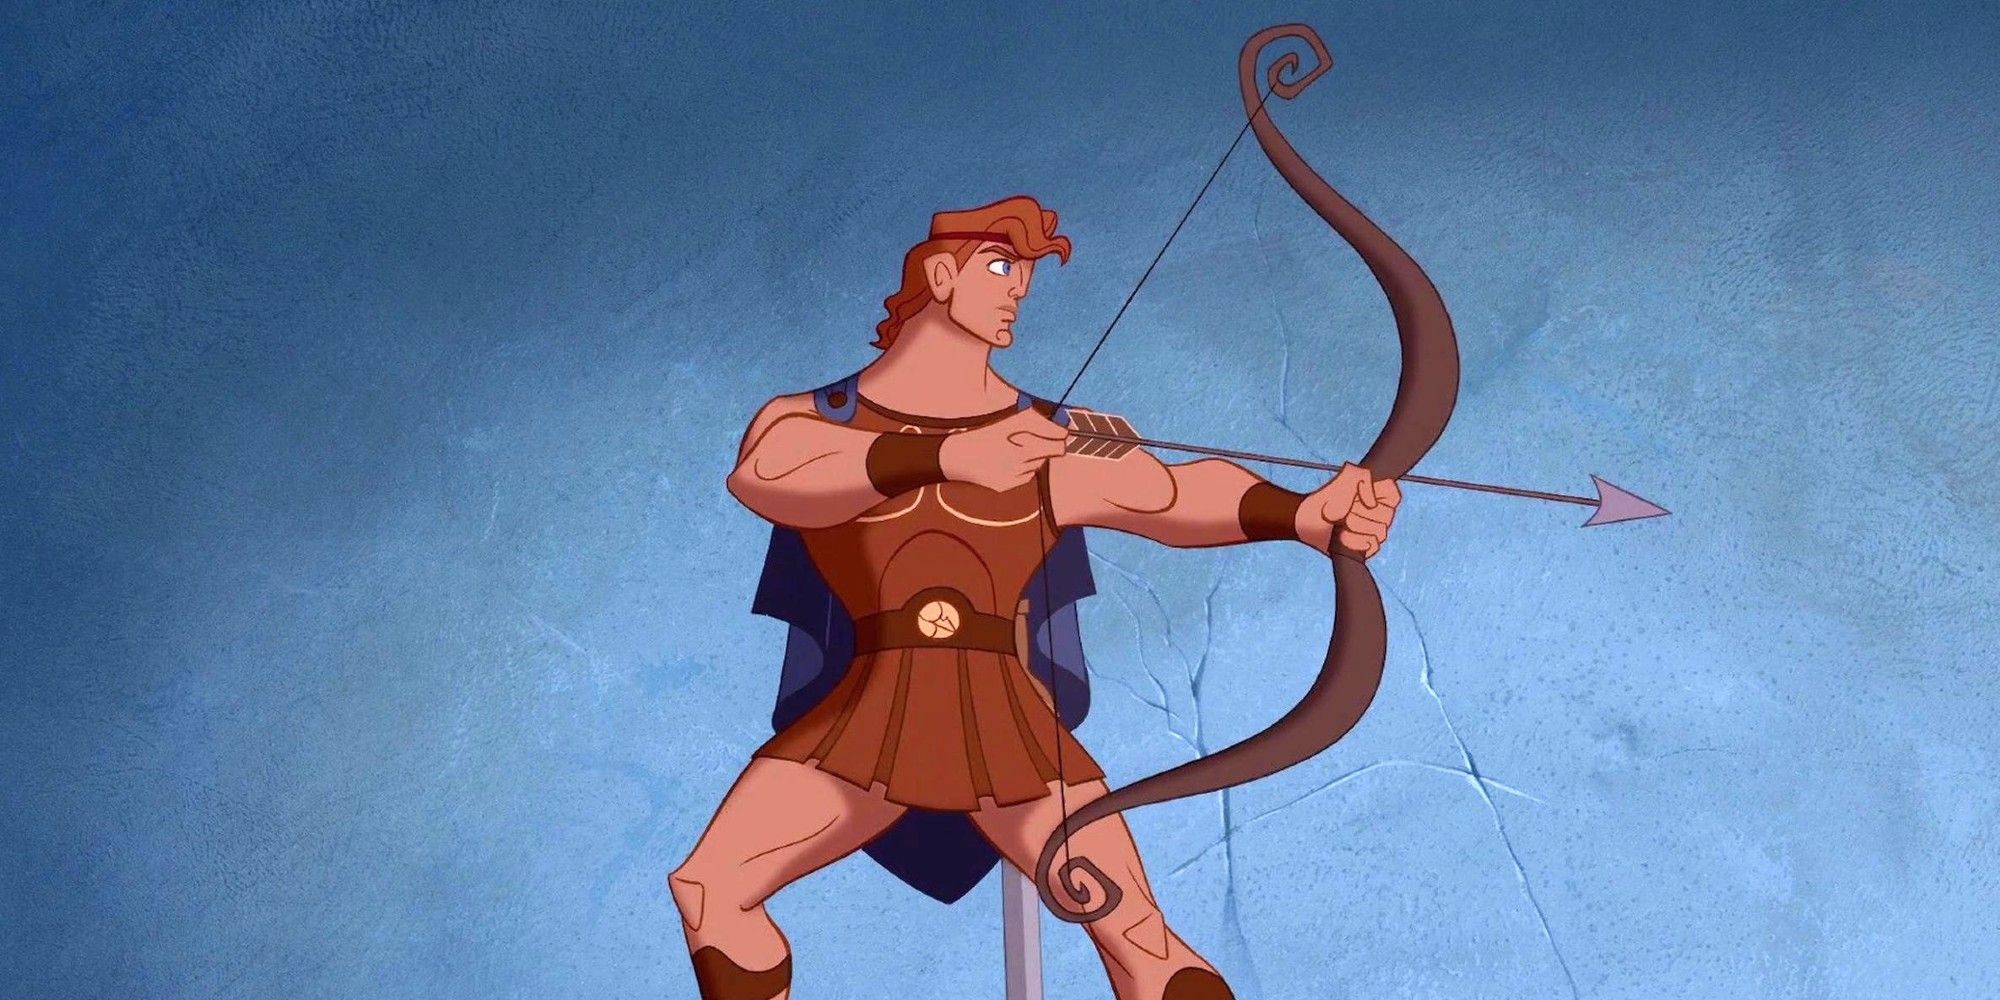 Hercules pointing his bow and arrow in Disney's Hercules